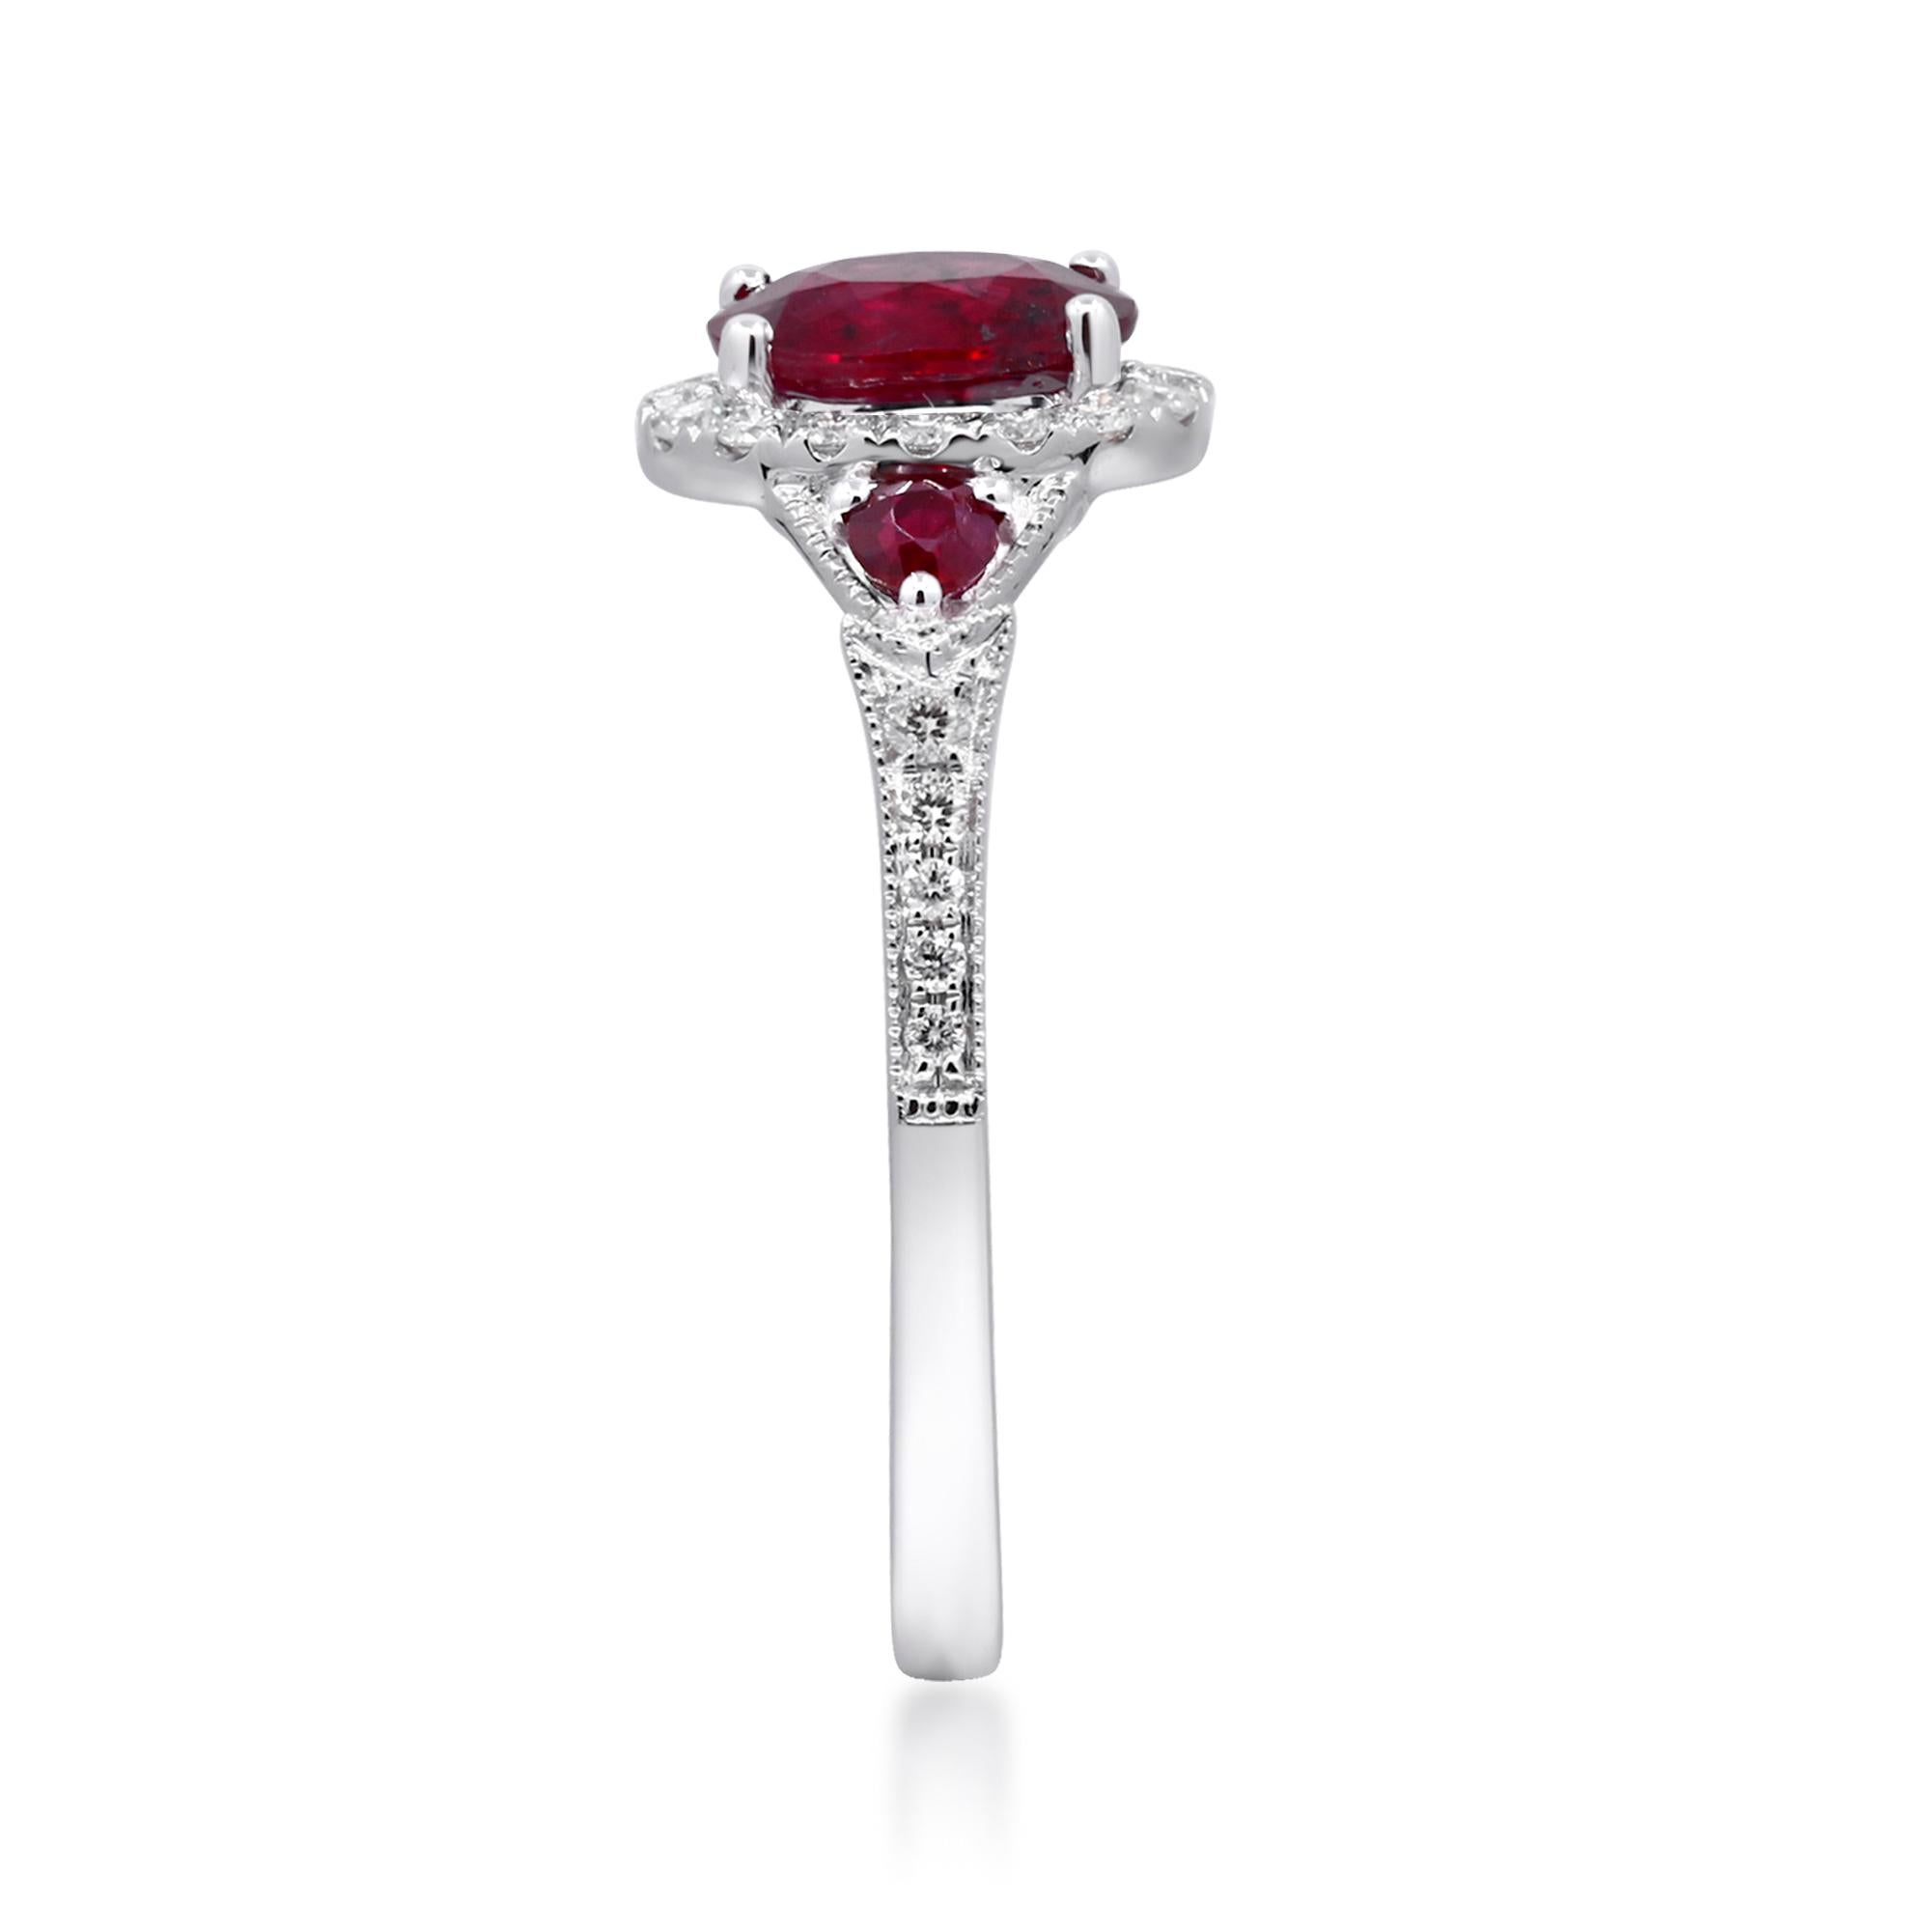 Decorate yourself in elegance with this Ring is crafted from 14-karat White Gold by Gin & Grace. This Ring is made up of 7x5 mm Oval-Cut Ruby (1 pcs) 1.00 carat, Round-cut Hot Pink Ruby (2 pcs) 0.15 carat and Round-cut White Diamond (26 Pcs) 0.23